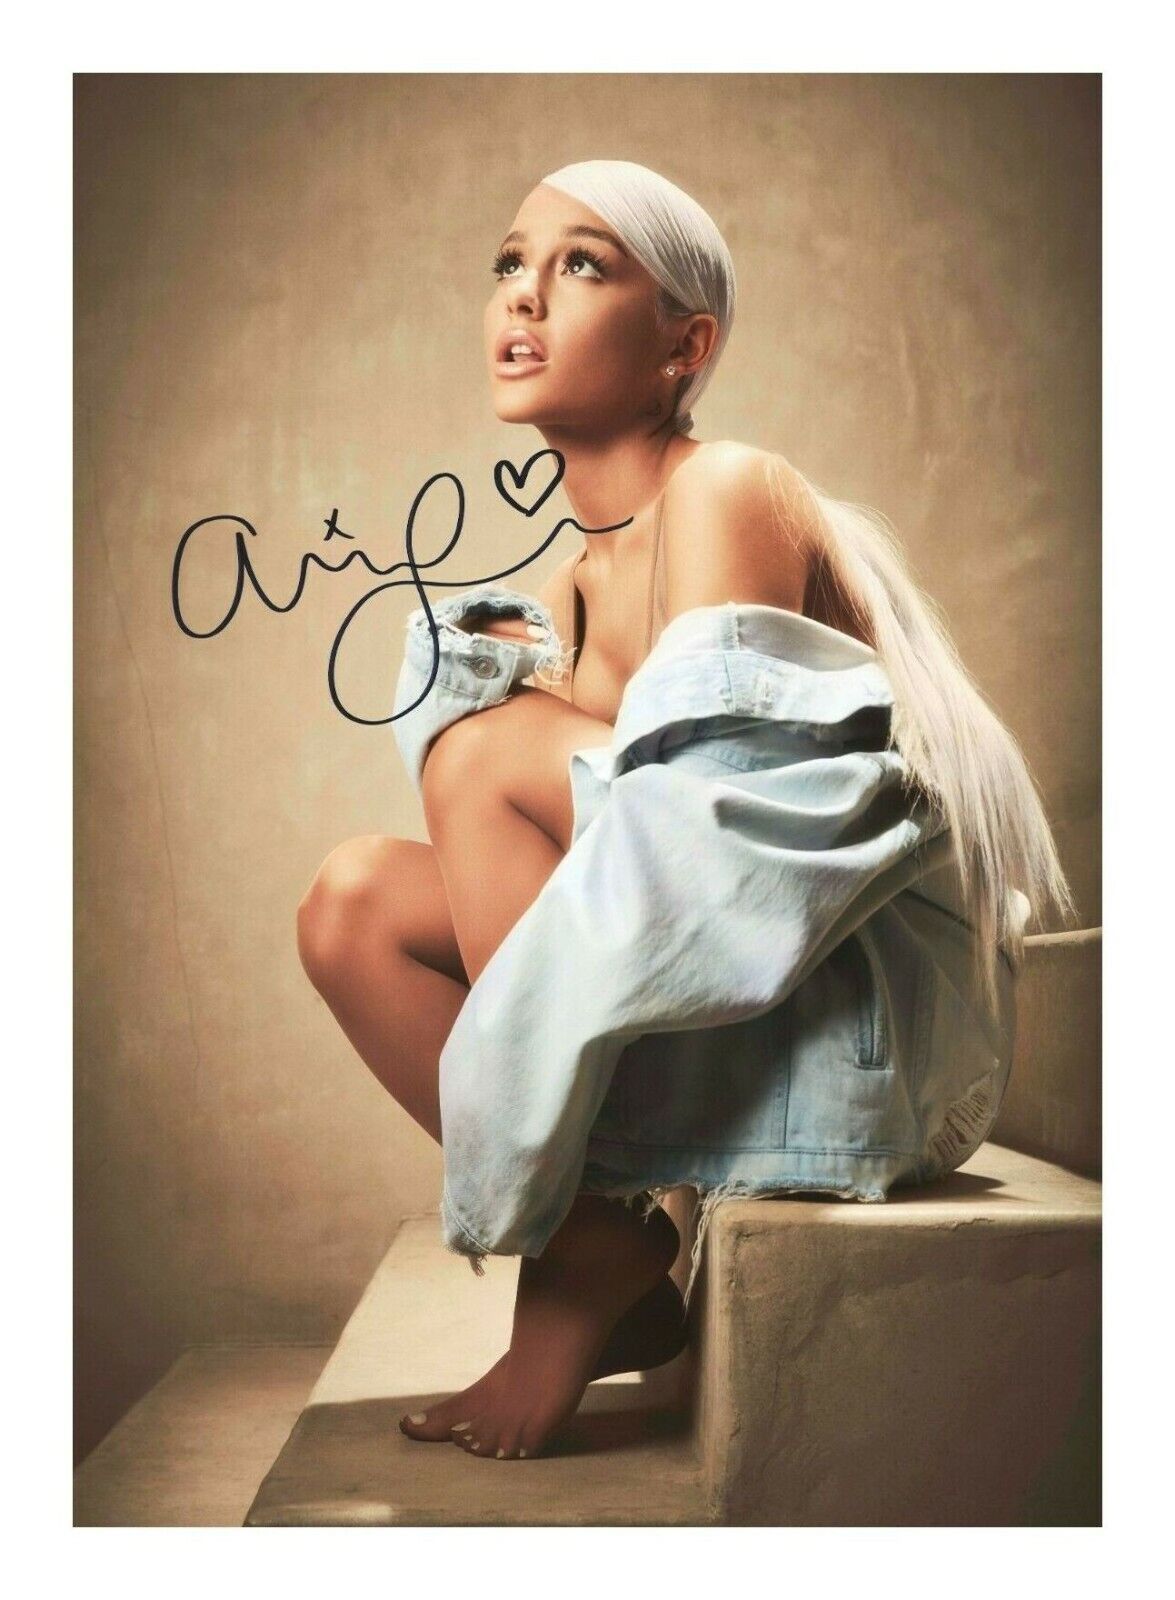 ARIANA GRANDE AUTOGRAPH SIGNED PP Photo Poster painting POSTER